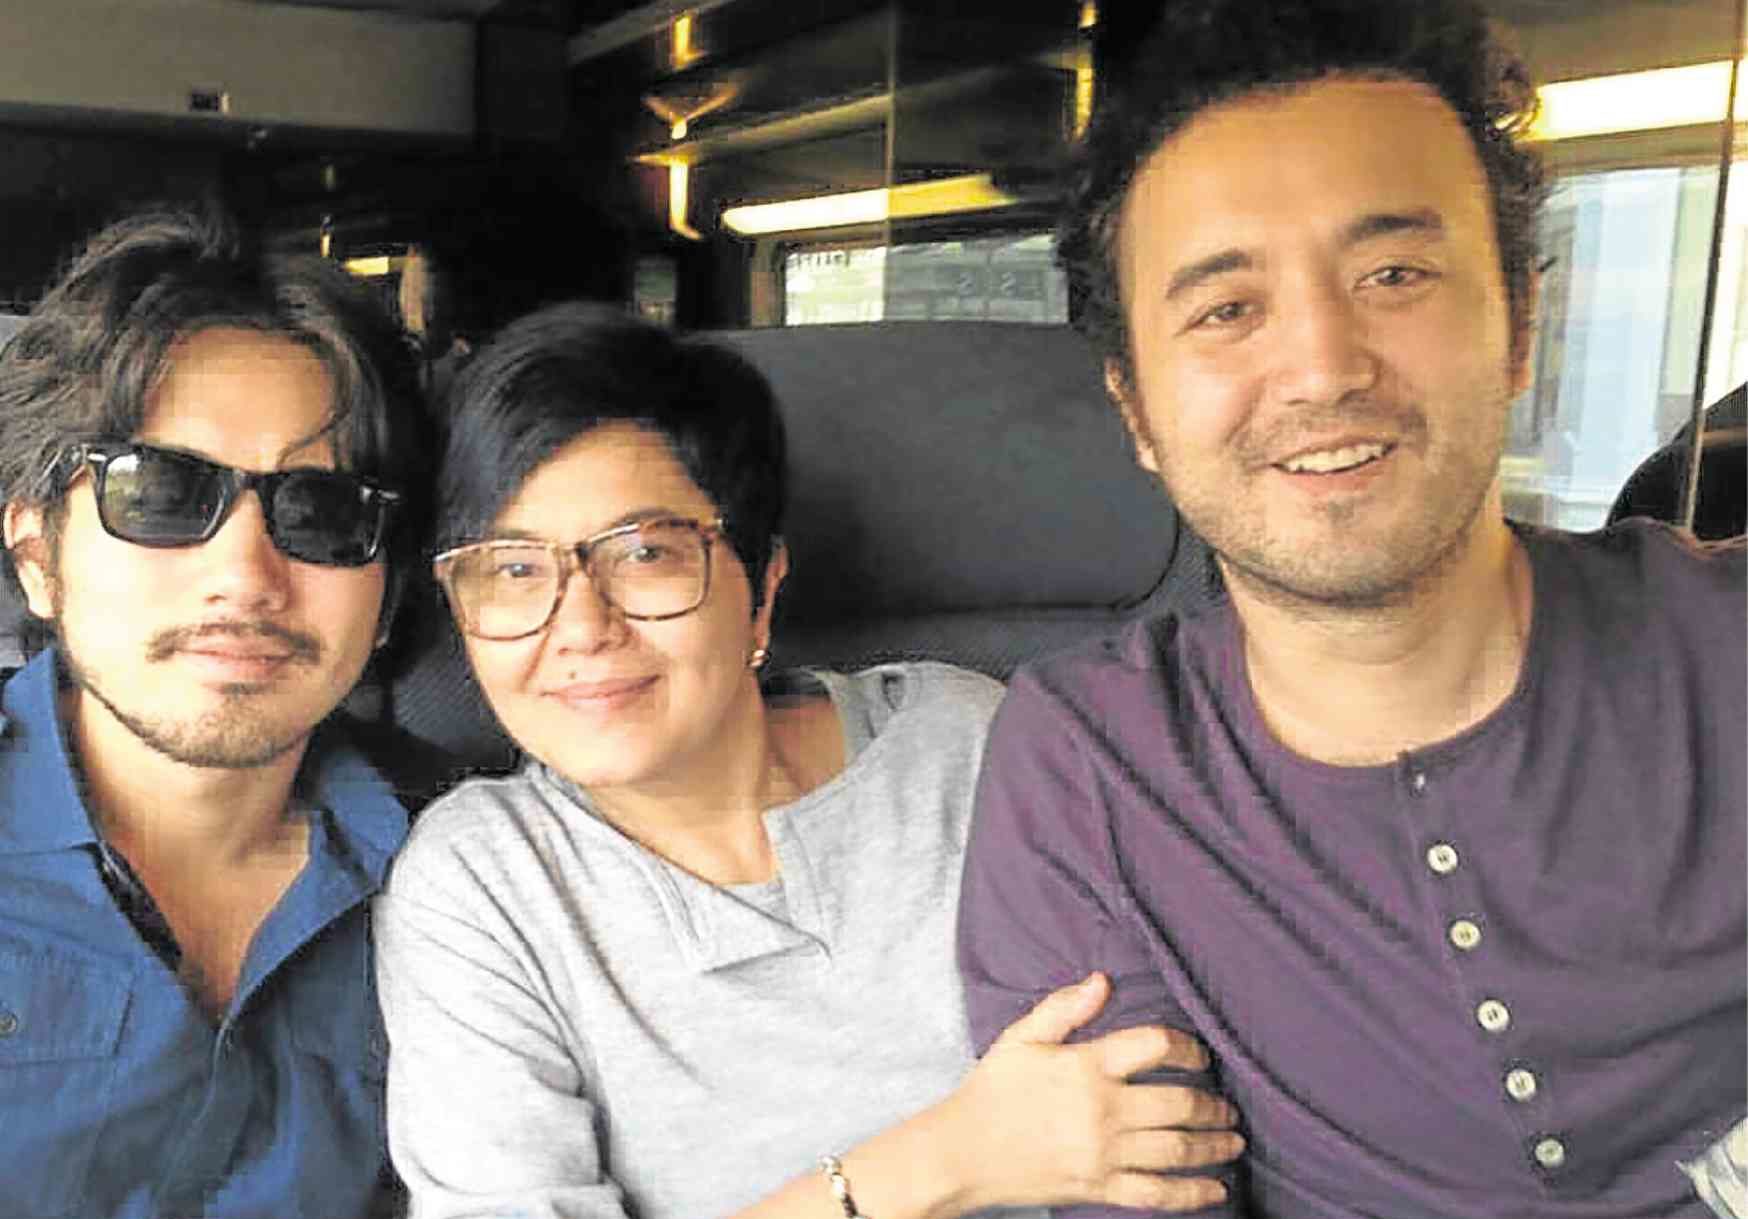 Lorna Tolentino (center) with sons Renz (left) and Rap